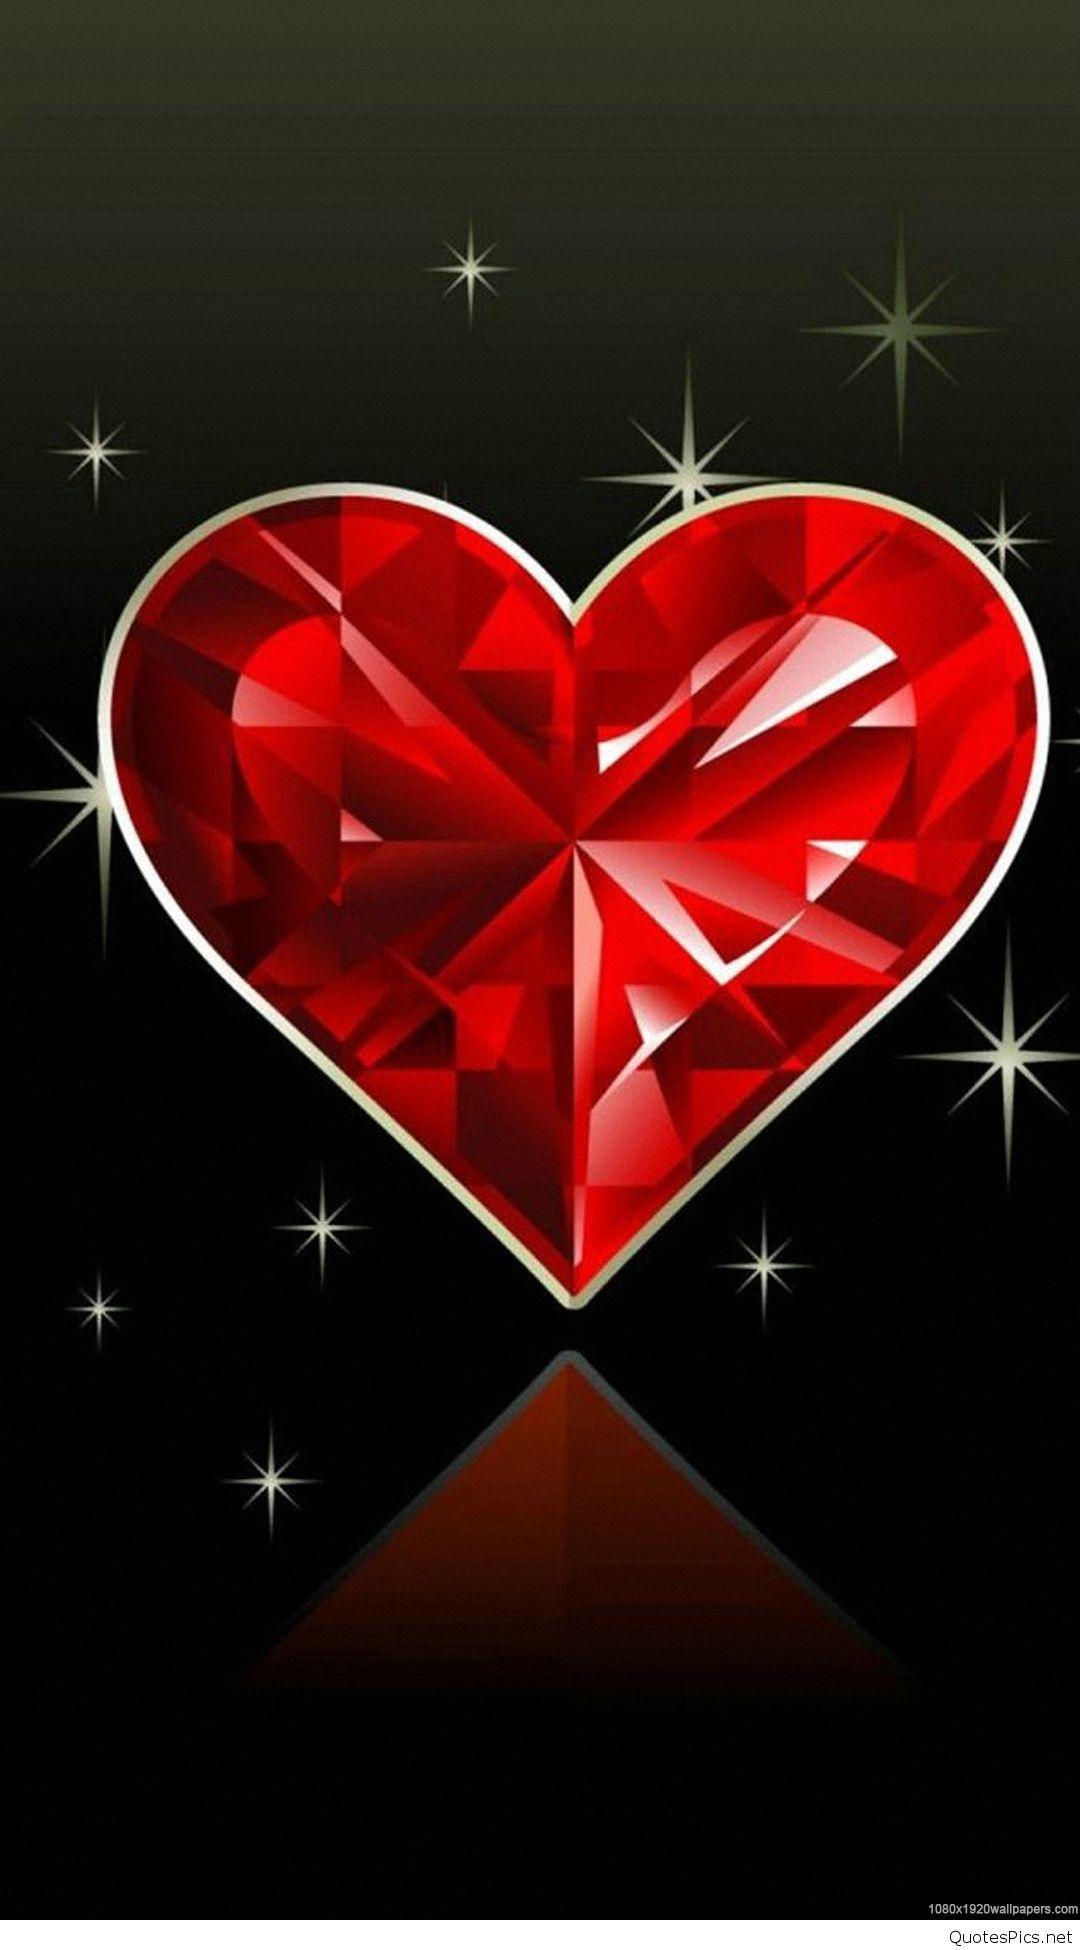 Love Heart HD Wallpaper For Android Dil Wallpaper